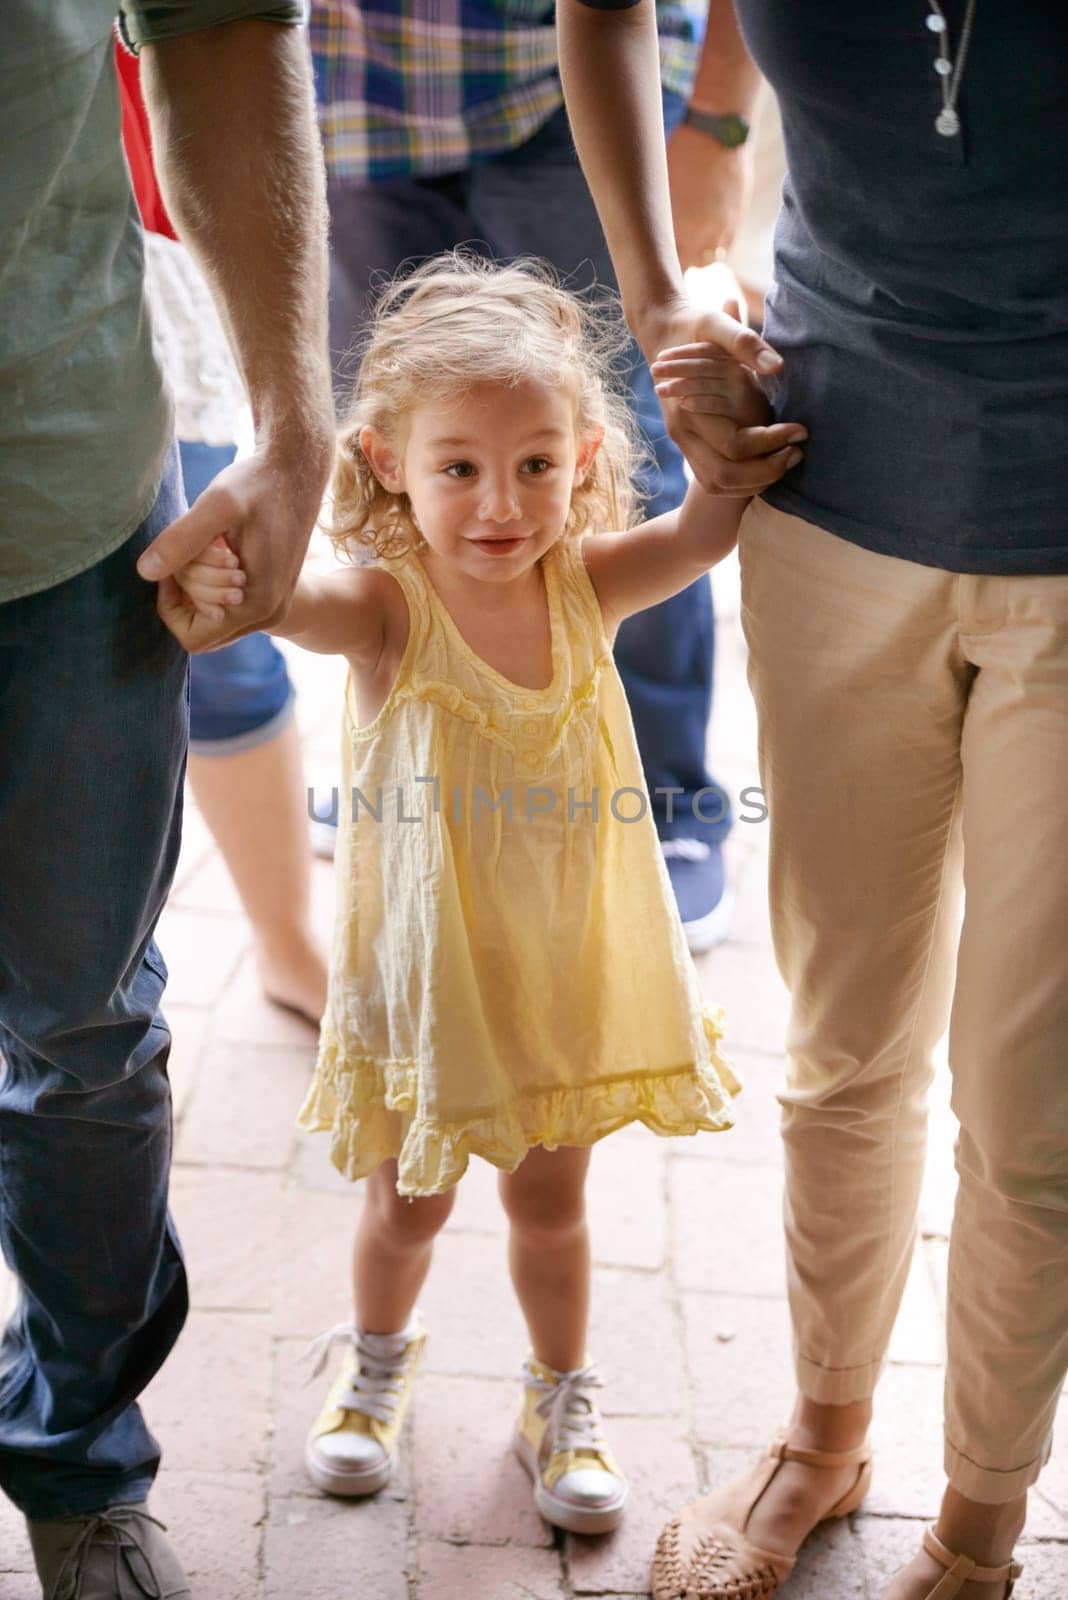 Happy, young girl and family holding hands for travel, fun adventure or holiday weekend in nature. Excited child, mom and dad walking outdoors for sightseeing, bonding and field trip together by YuriArcurs